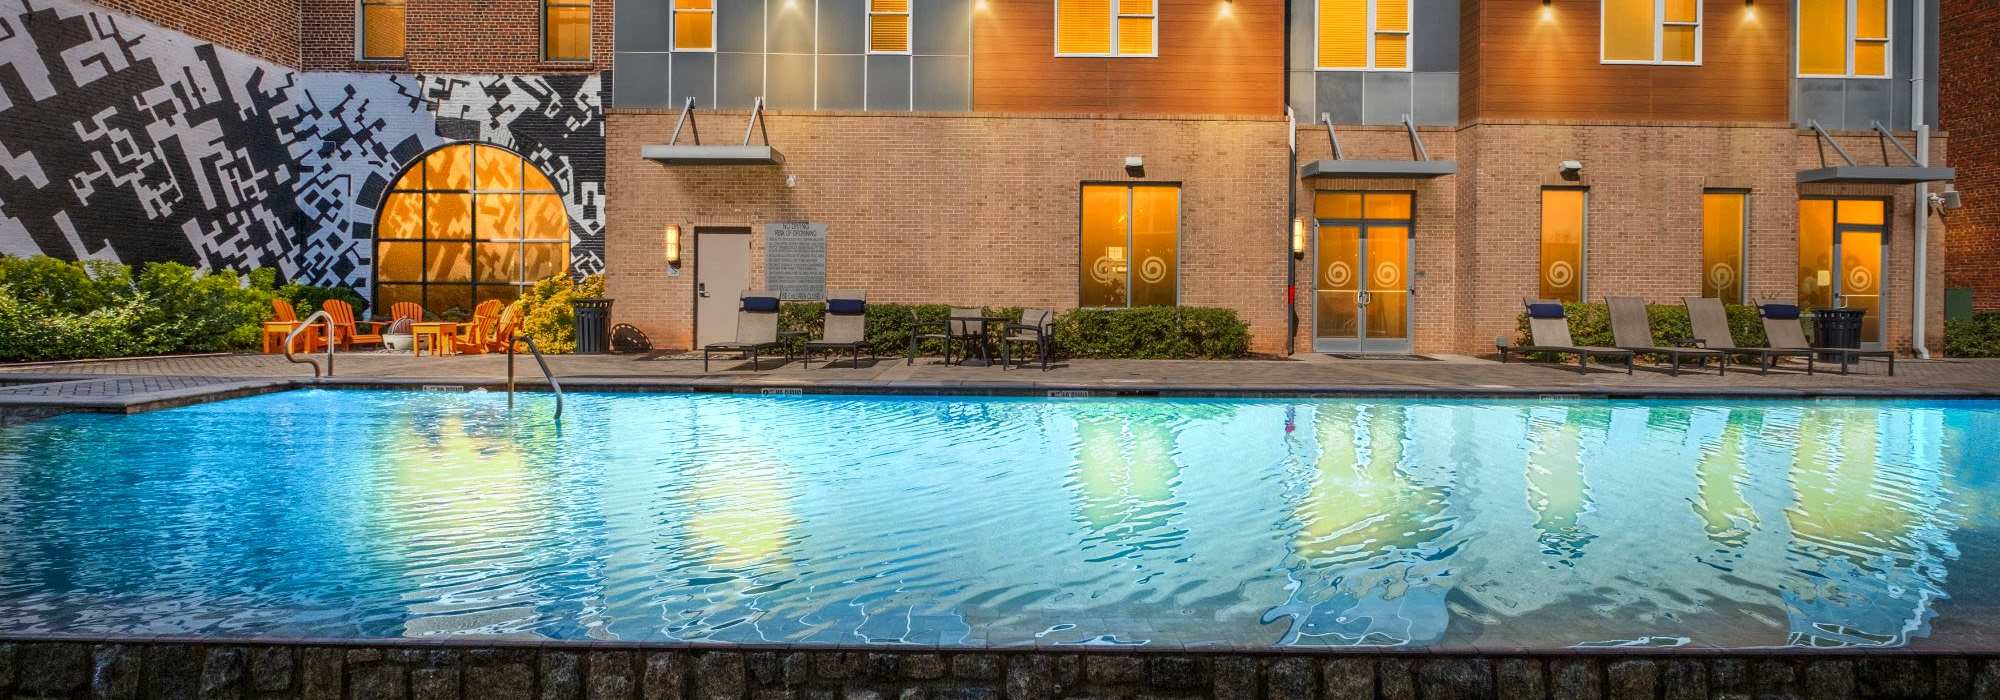 Rendering of residents swimming pool at Lofts at Capricorn in Macon, Georgia